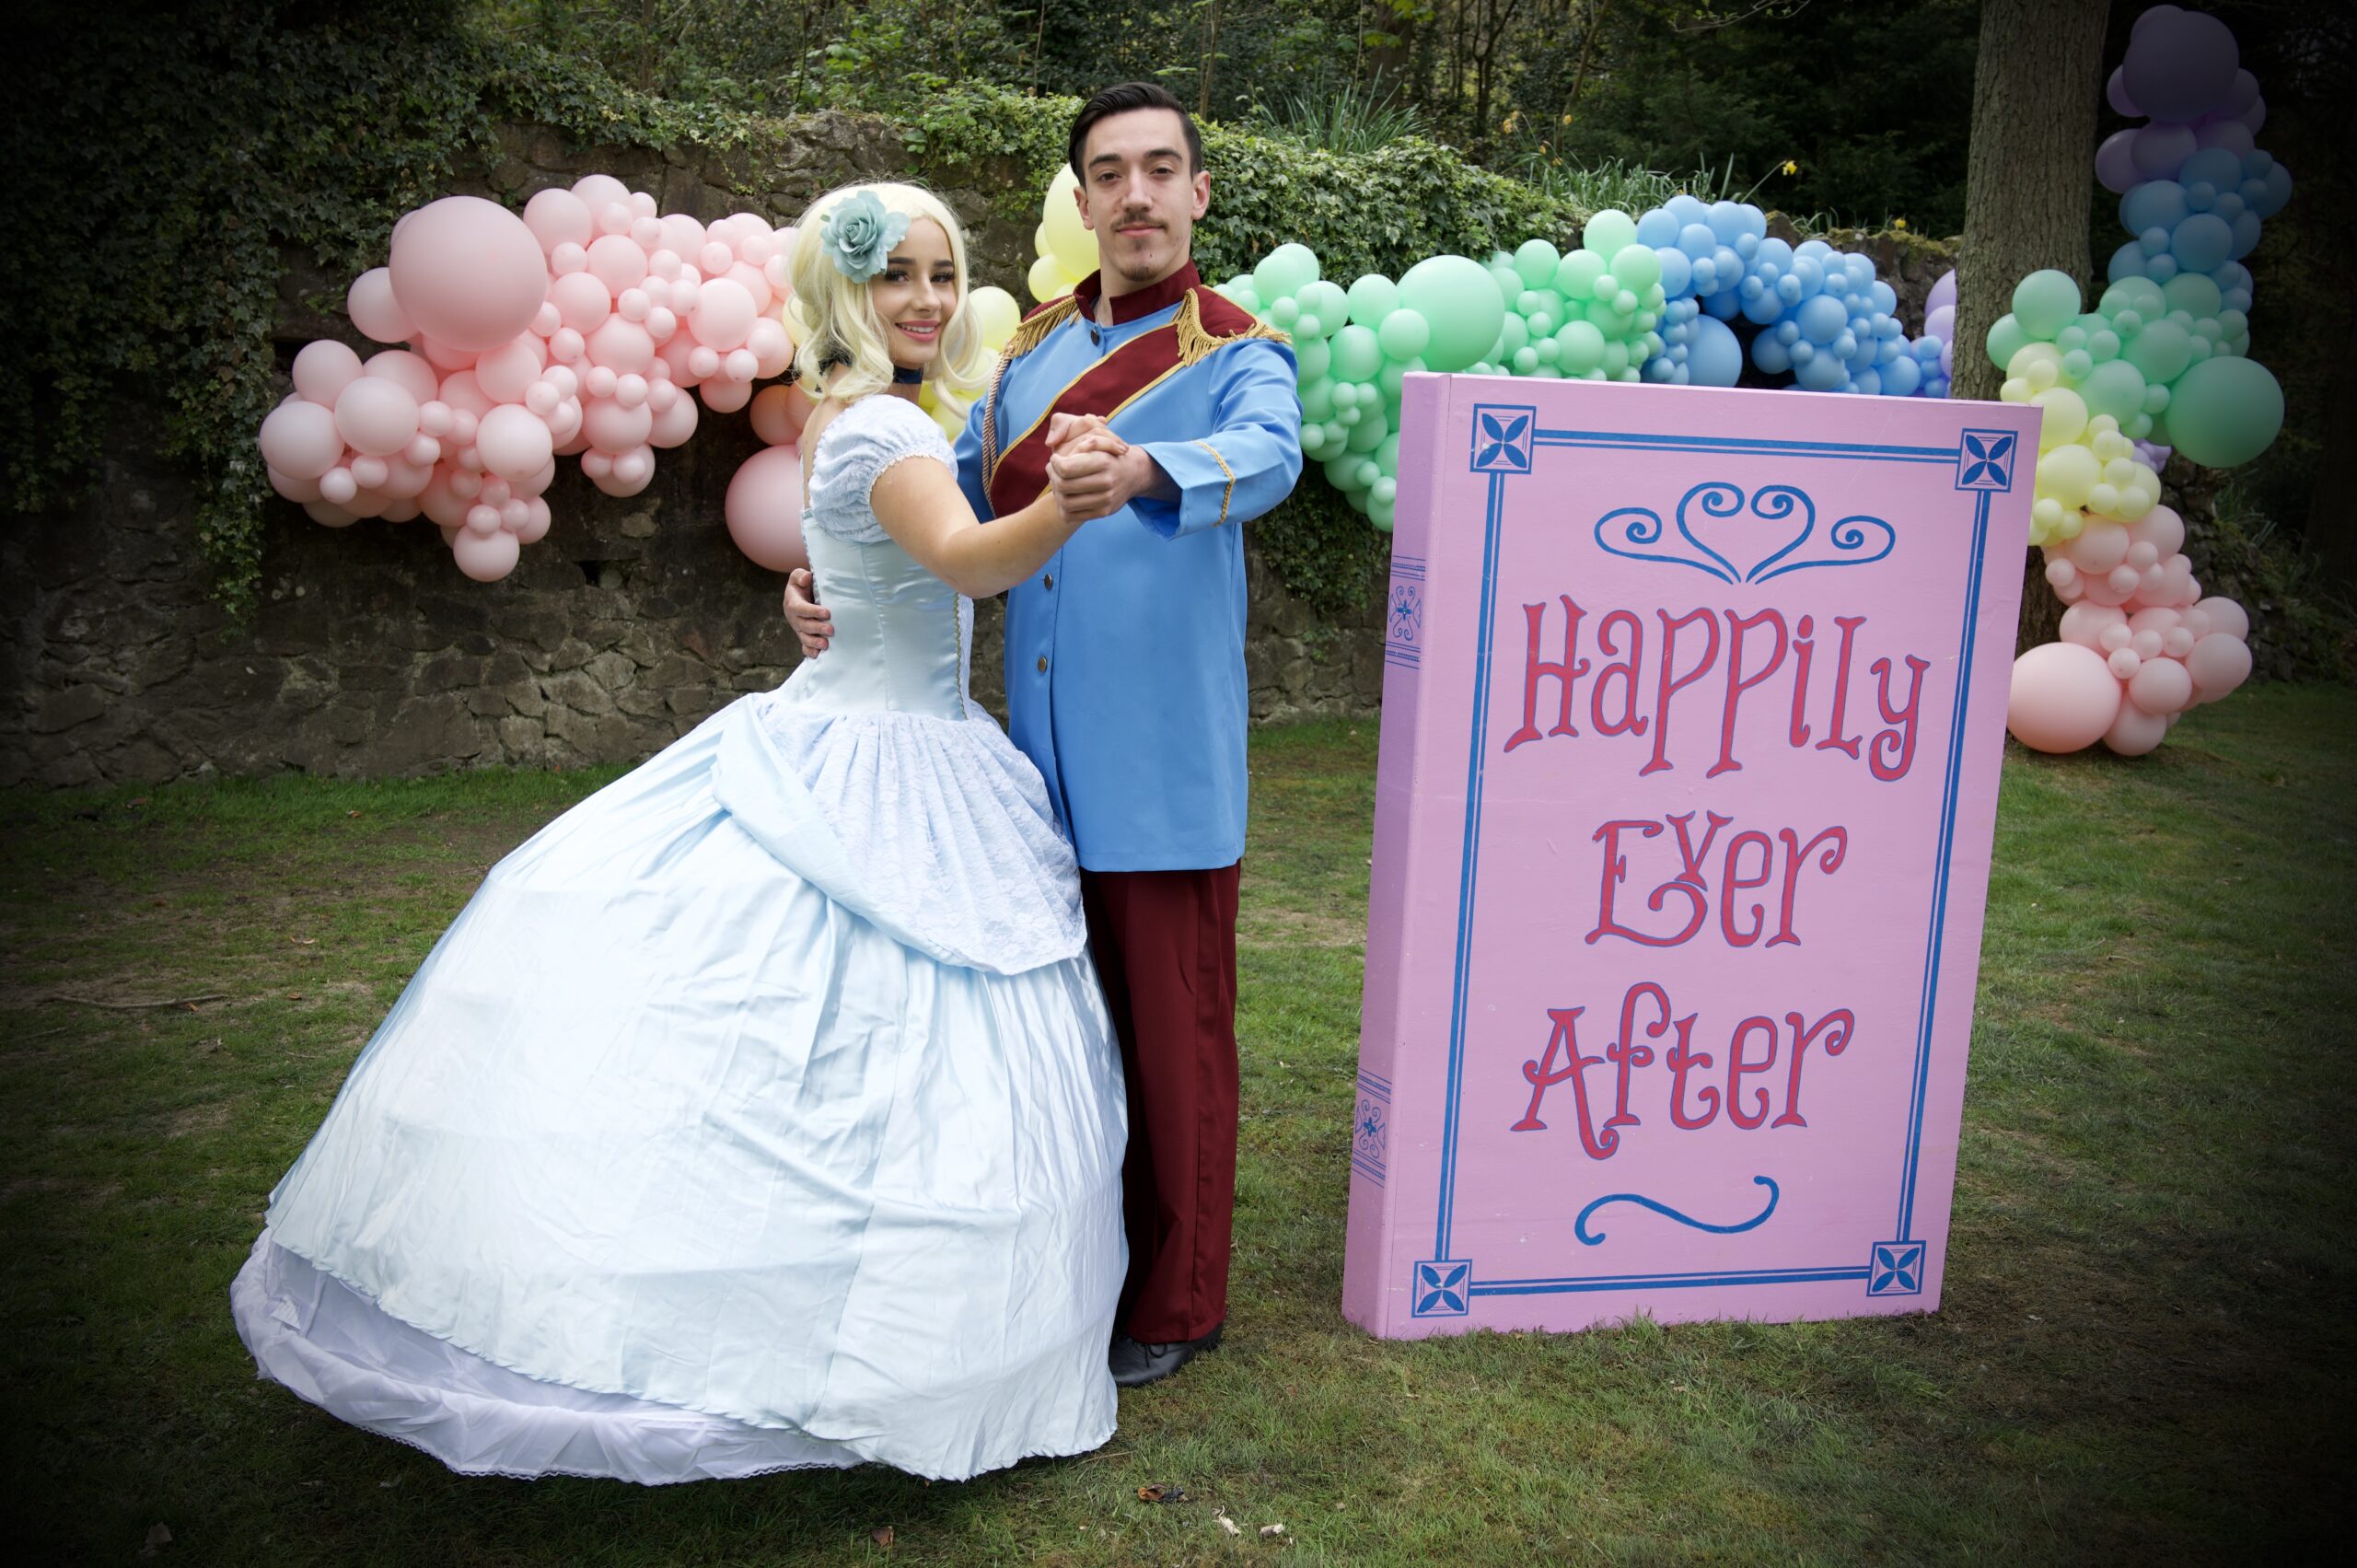 Happily Ever After Disney princess themed prop with balloons and character dress up